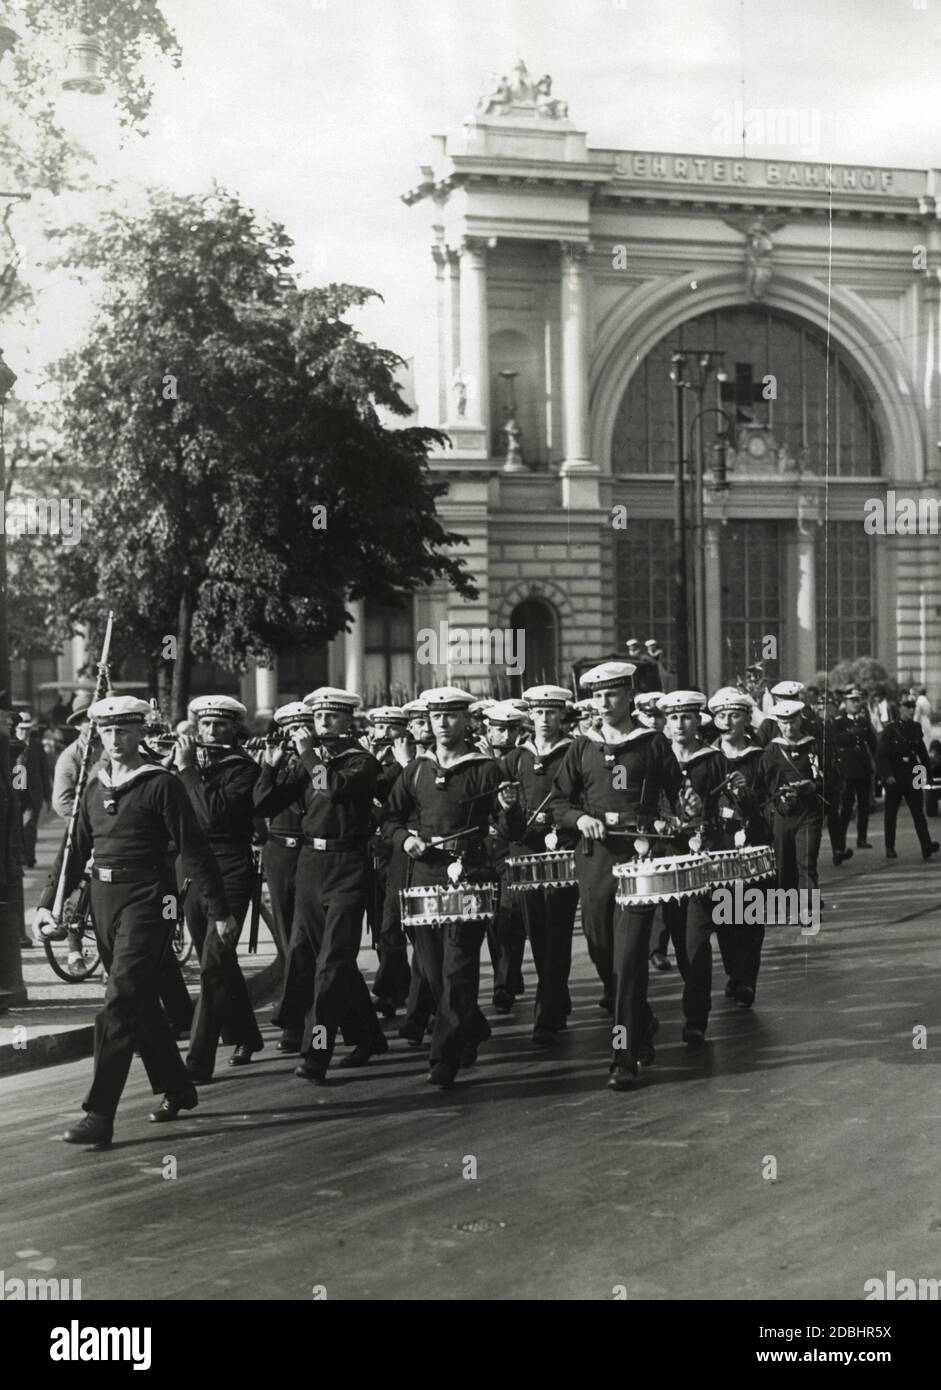 The Marinewache from Kiel leaves the Lehrter Bahnhof after arriving in Berlin. They had traveled to Berlin for the Skagerrak celebration and were to hold the parade of honor in front of the Reich Presidential Palace on May 31, 1931. Stock Photo